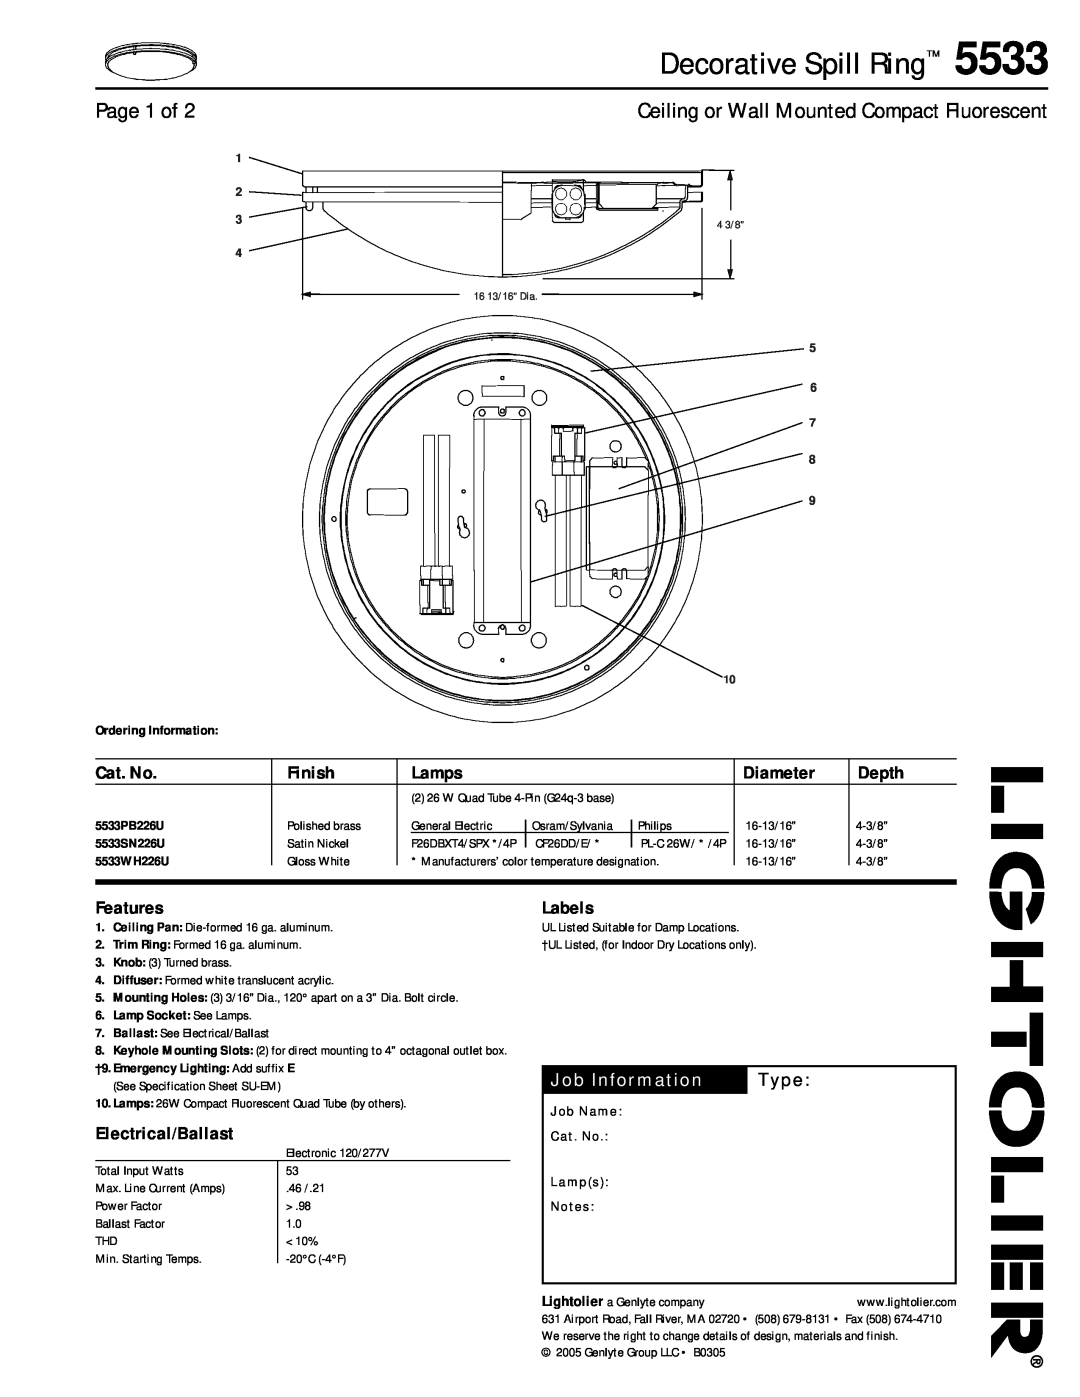 Lightolier specifications Decorative Spill Ring, Page 1 of, Job Information, Type, Ordering Information, 5533PB226U 